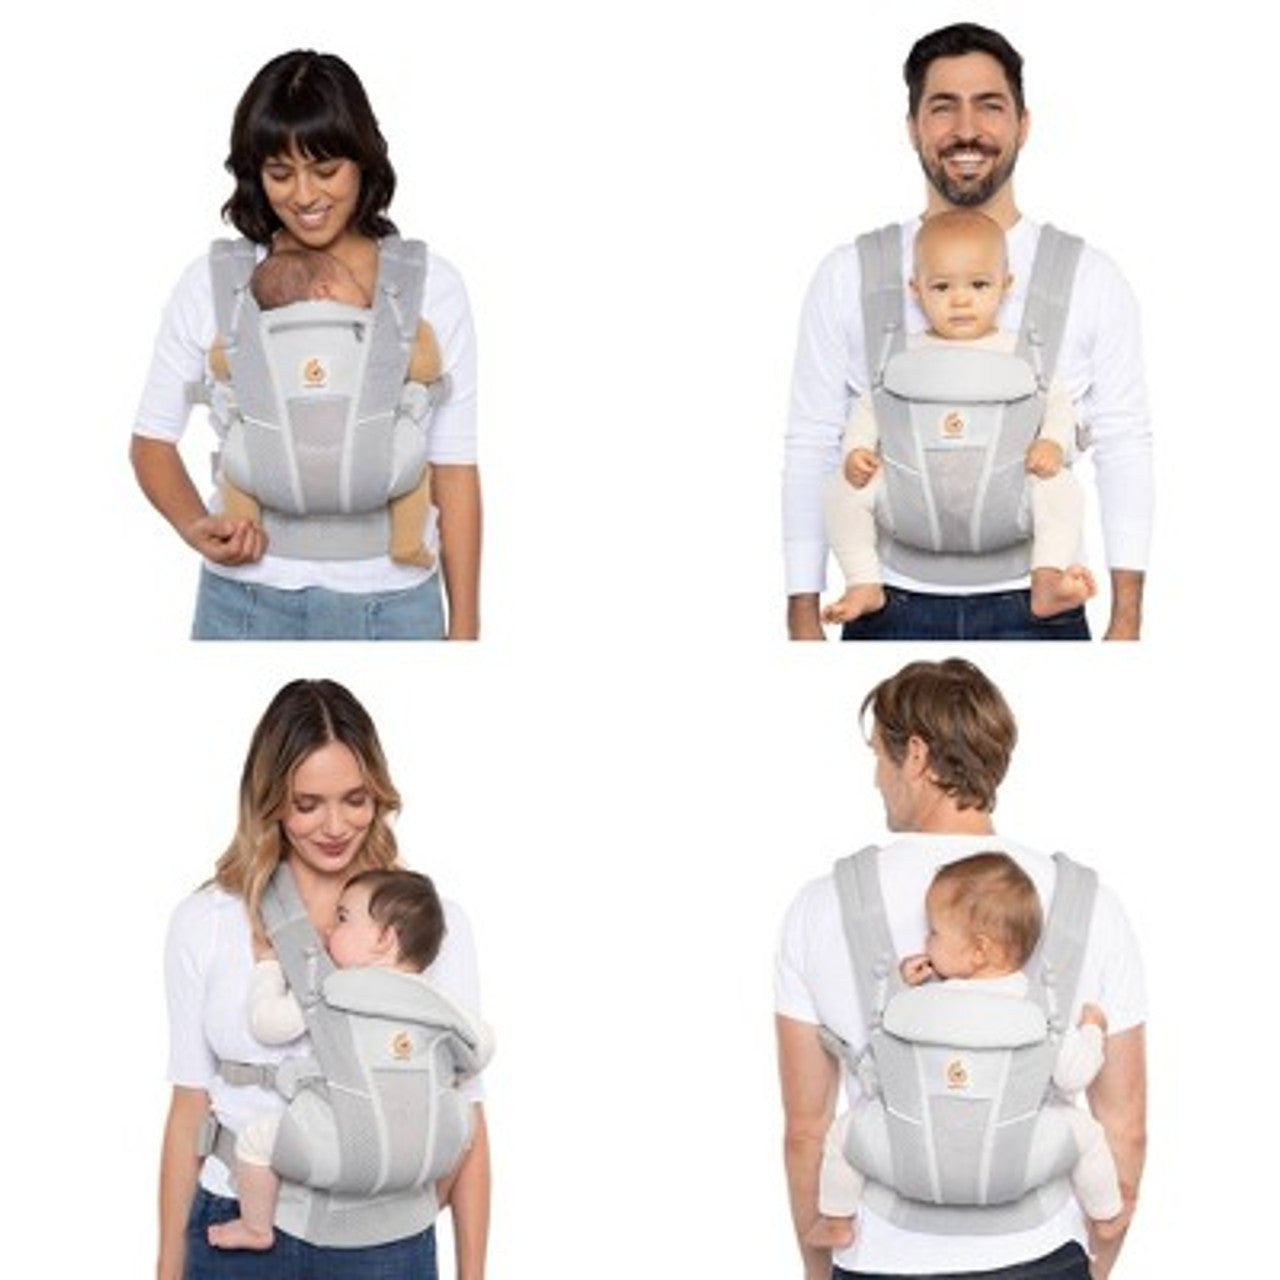 New - Ergobaby Omni Breeze All-in-1 Baby Carrier - Onyx Black